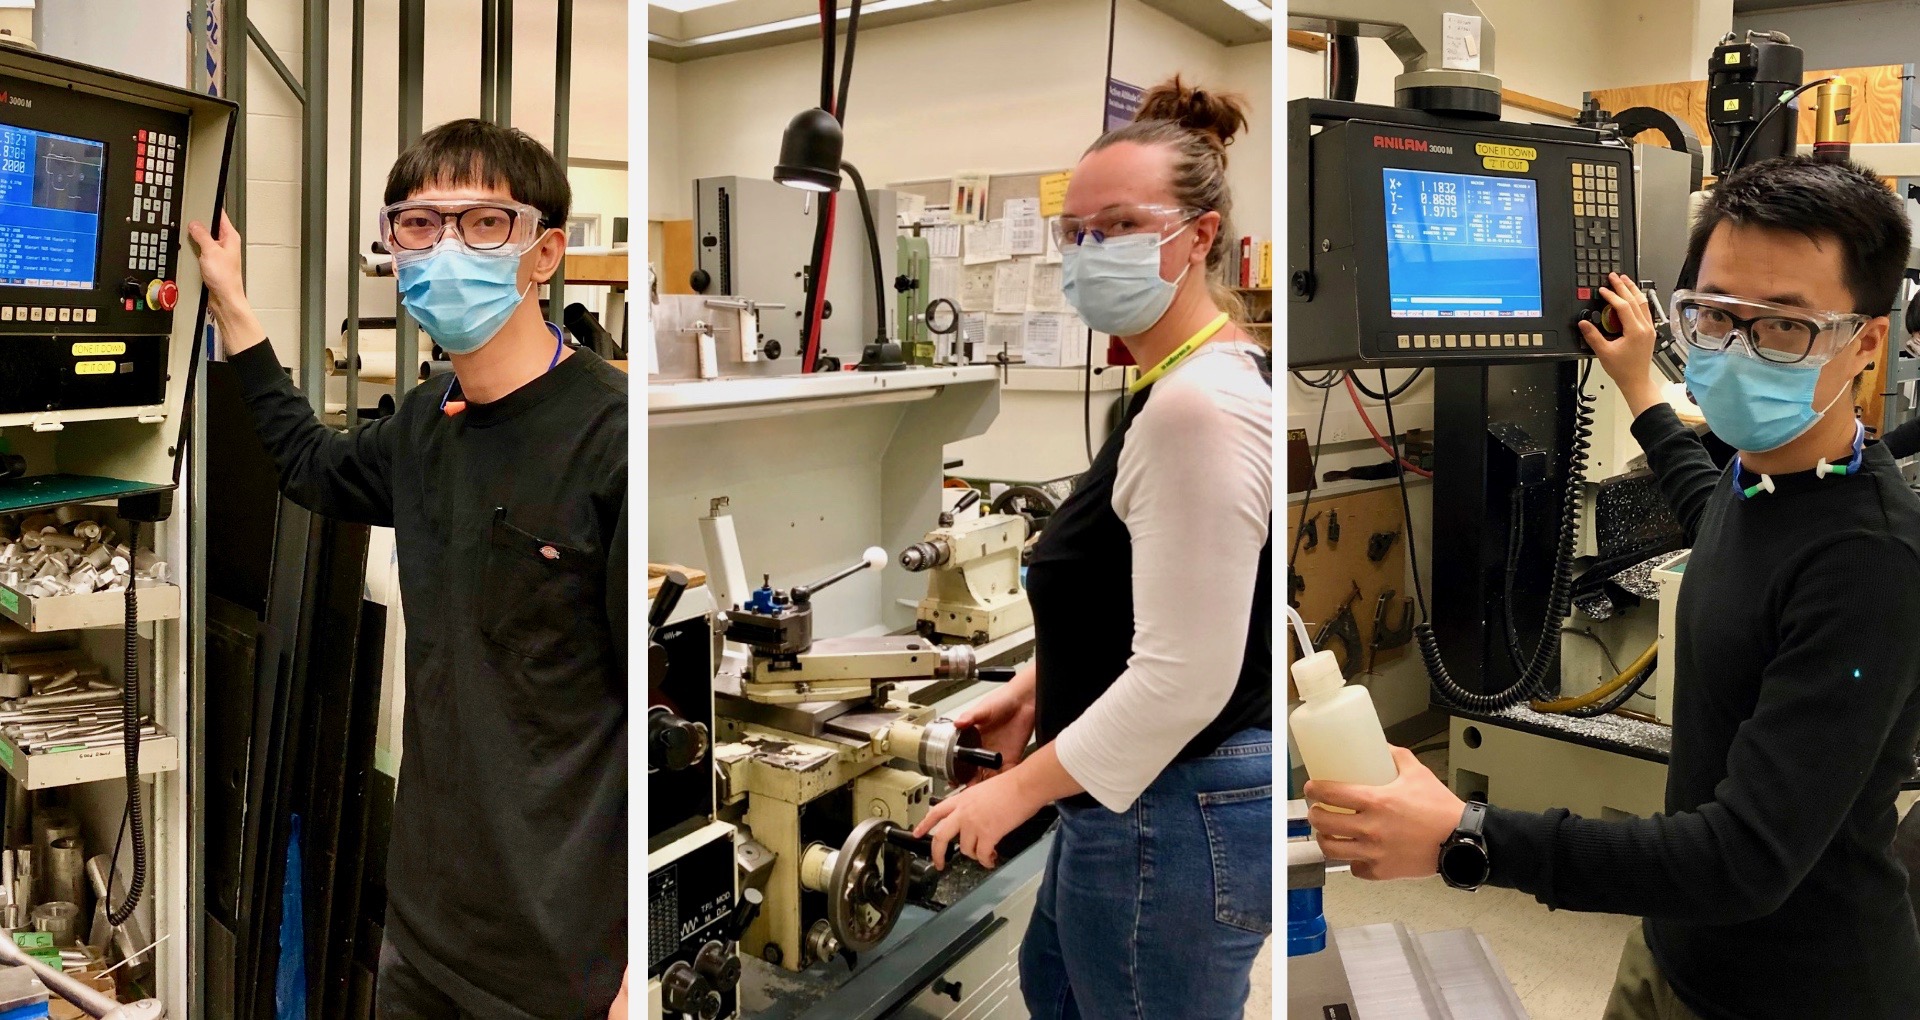 The three co-op students, wearing masks and protective eye gear, work at various machines in the machine shop.